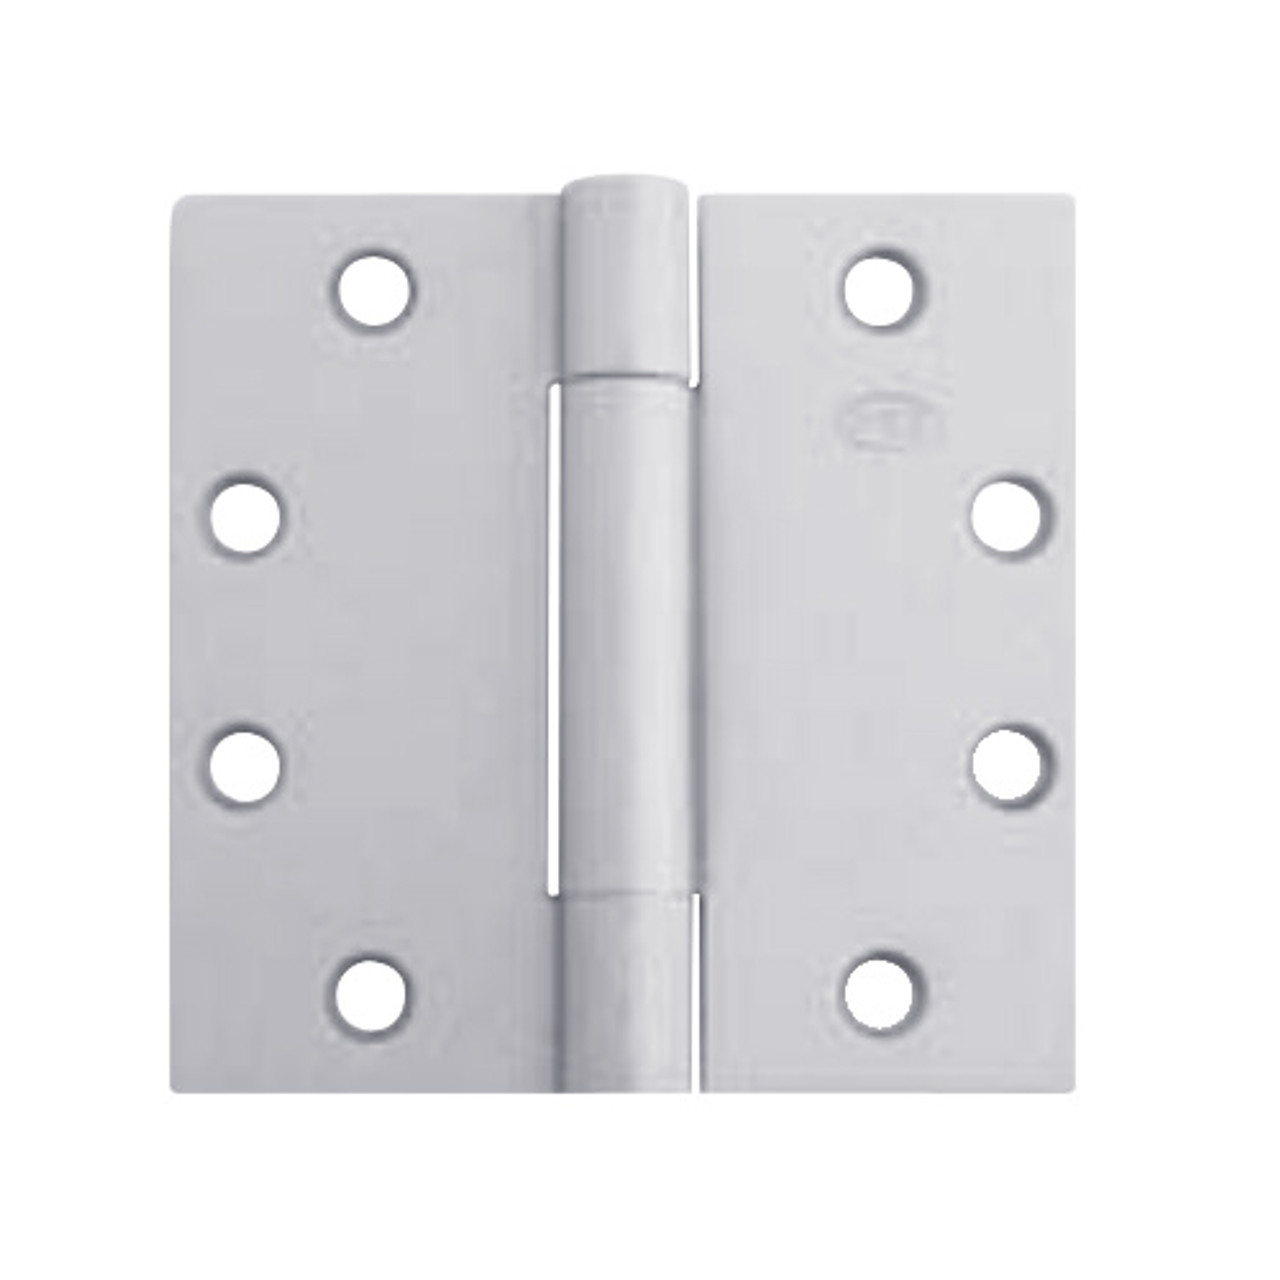 3CB1WT-4-5x5-652 IVES 3 Knuckle Concealed Bearing Full Mortise Wide Throw Butt Hinge in Satin Chrome Plated